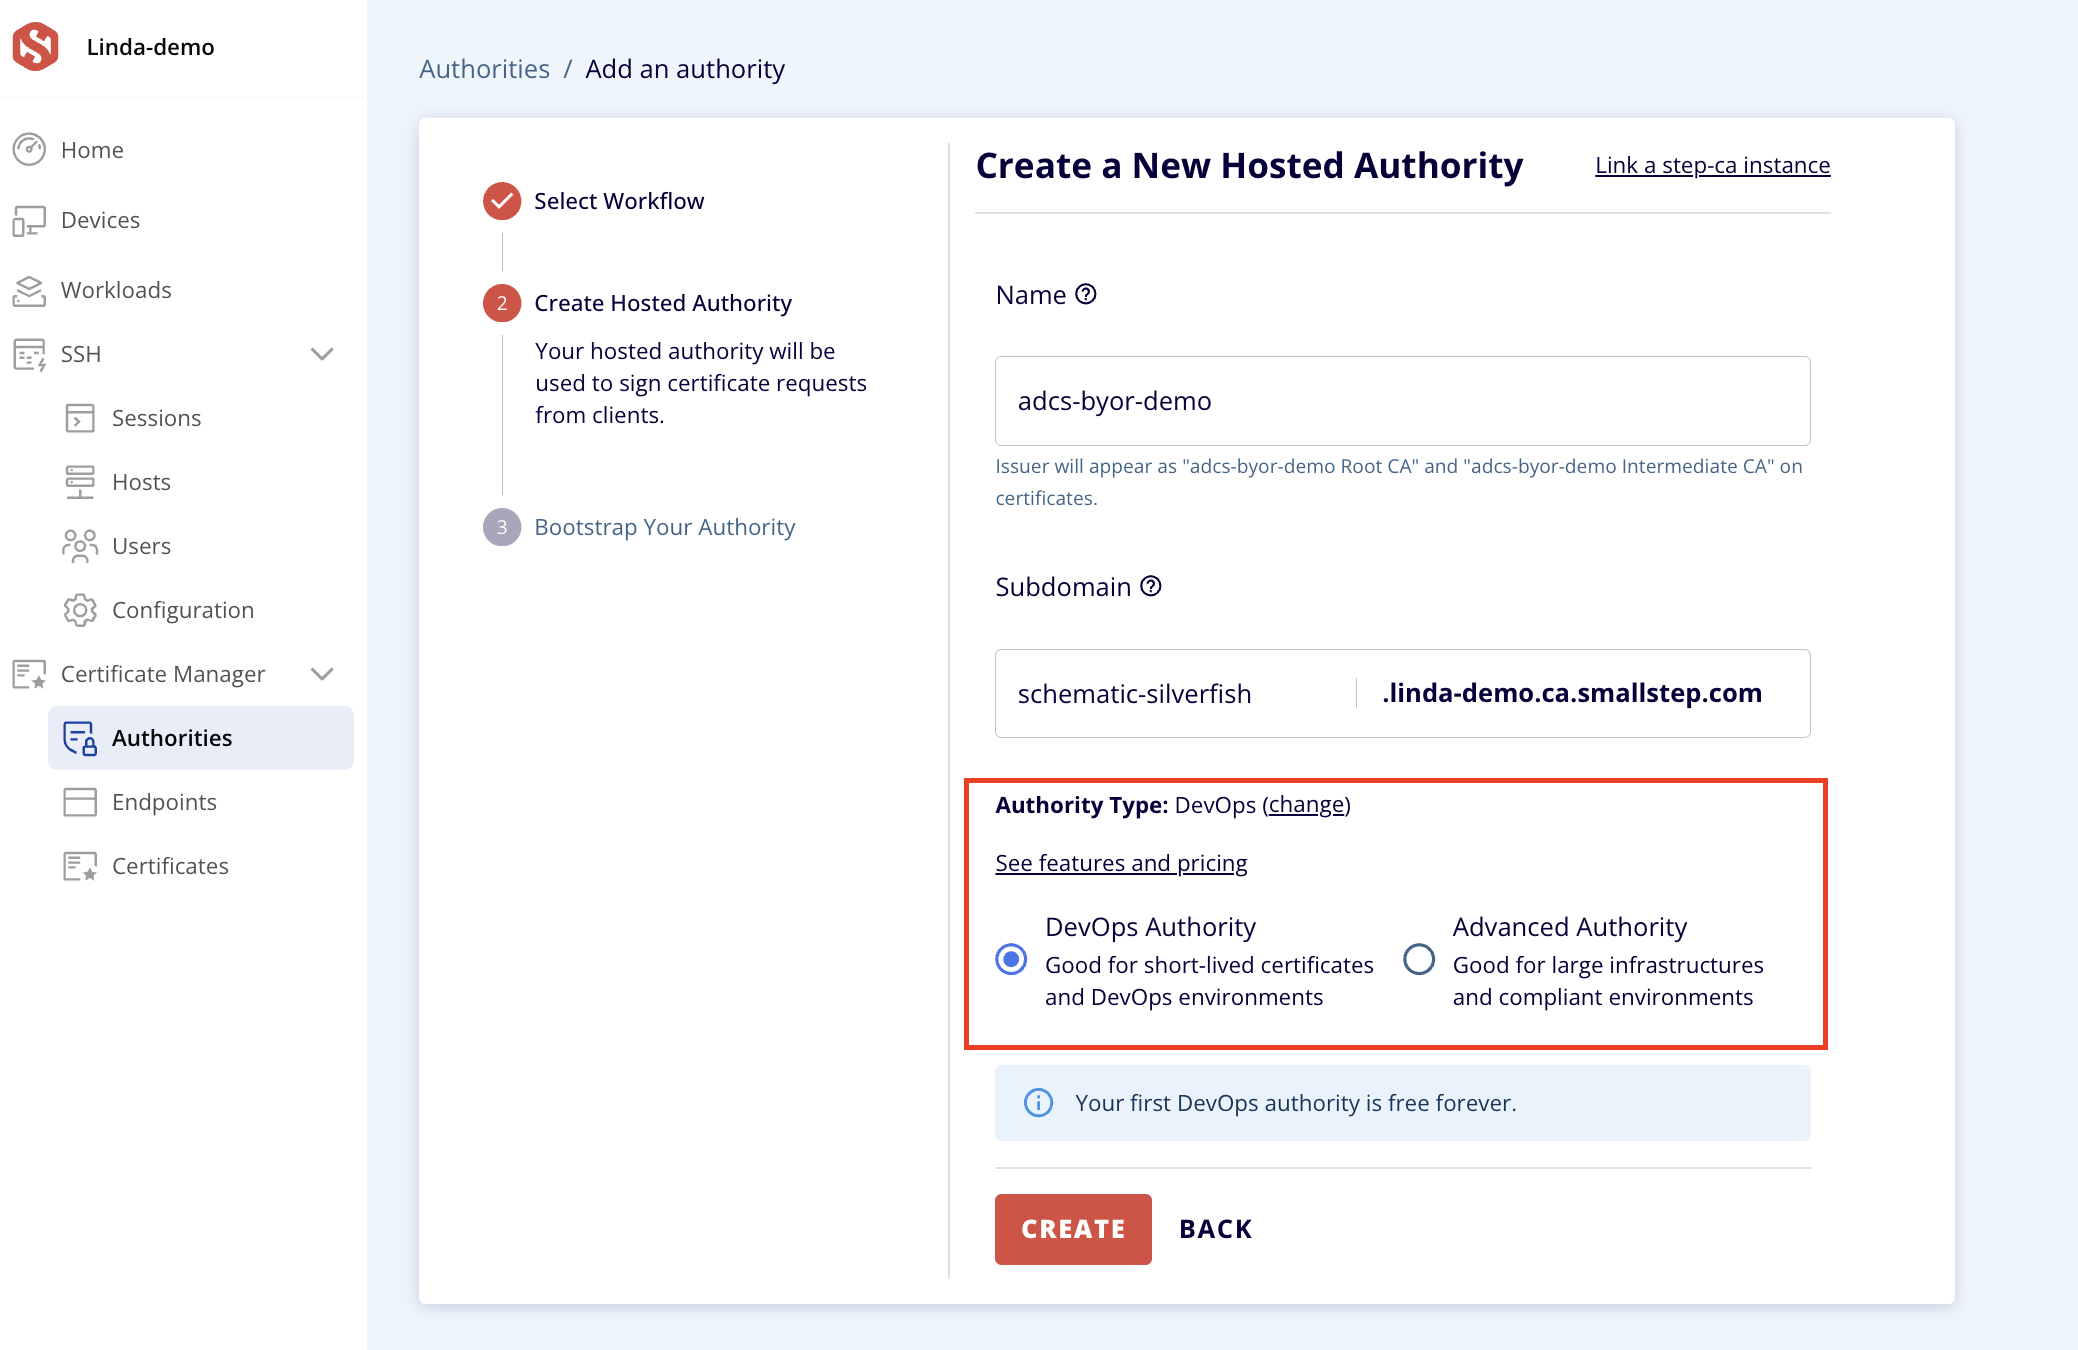 Screenshot of how to switch from Default Authority to Advanced Authority